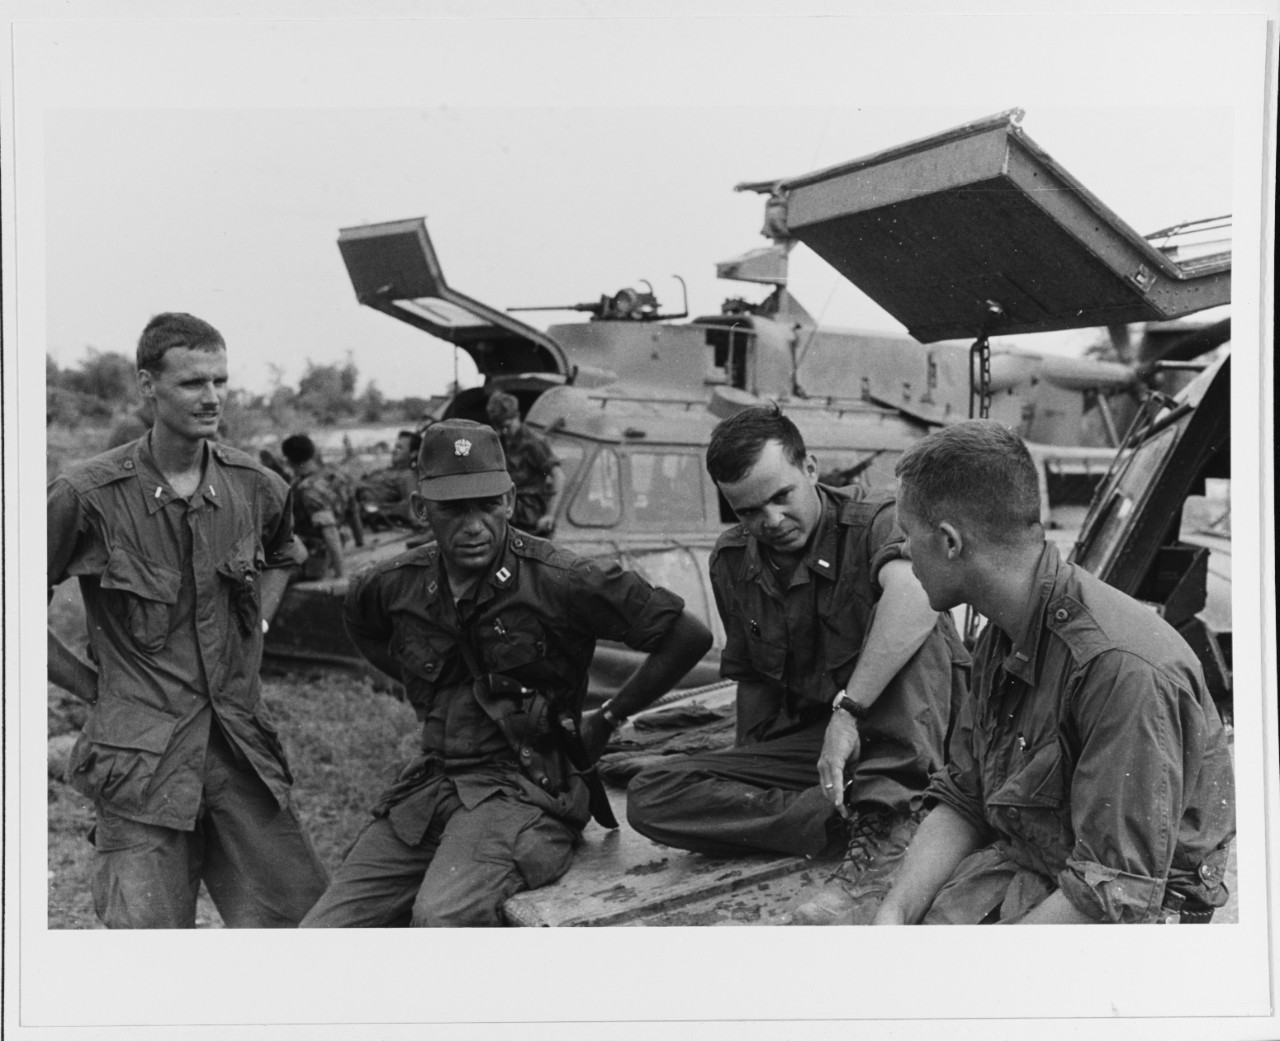 Mapping plans for the day's operation against the Viet Cong